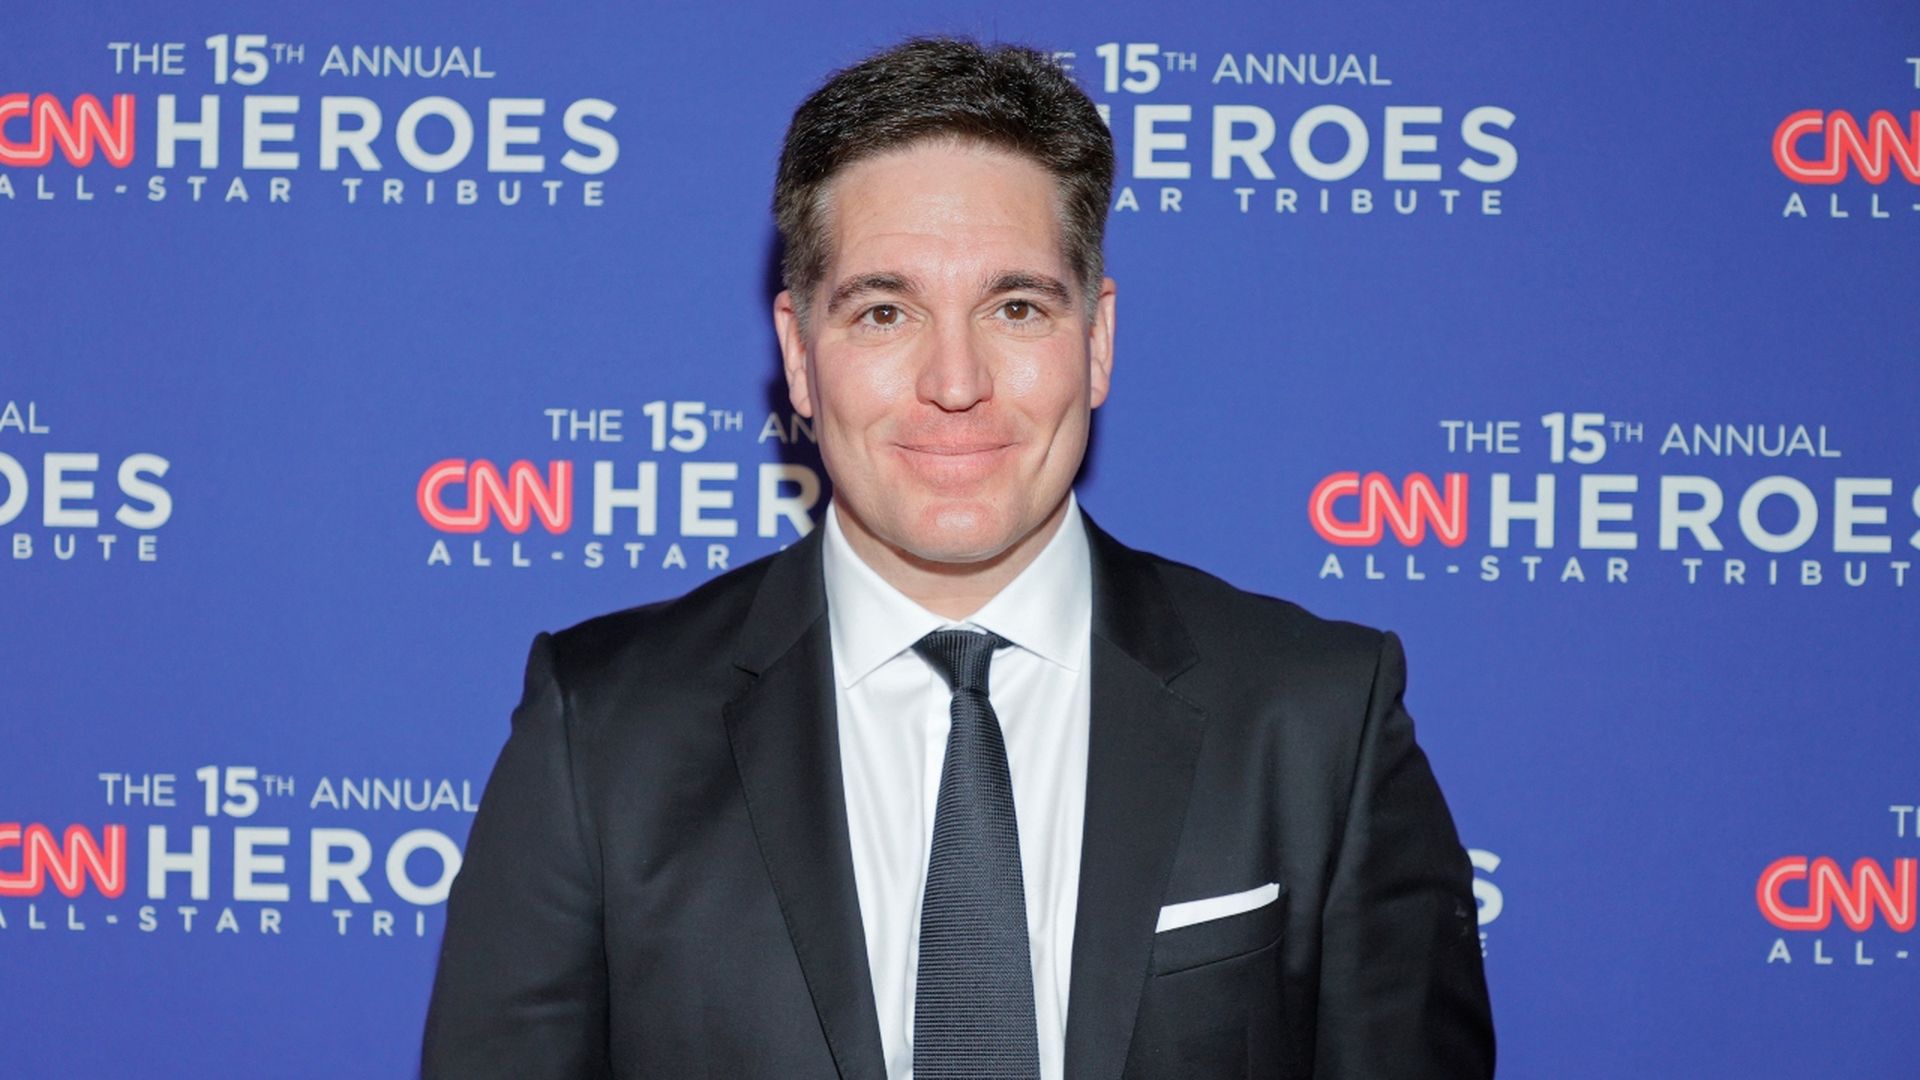 WarnerMedia CEO Jason Kilar standing by himself in front of a CNN Heroes step and repeat.